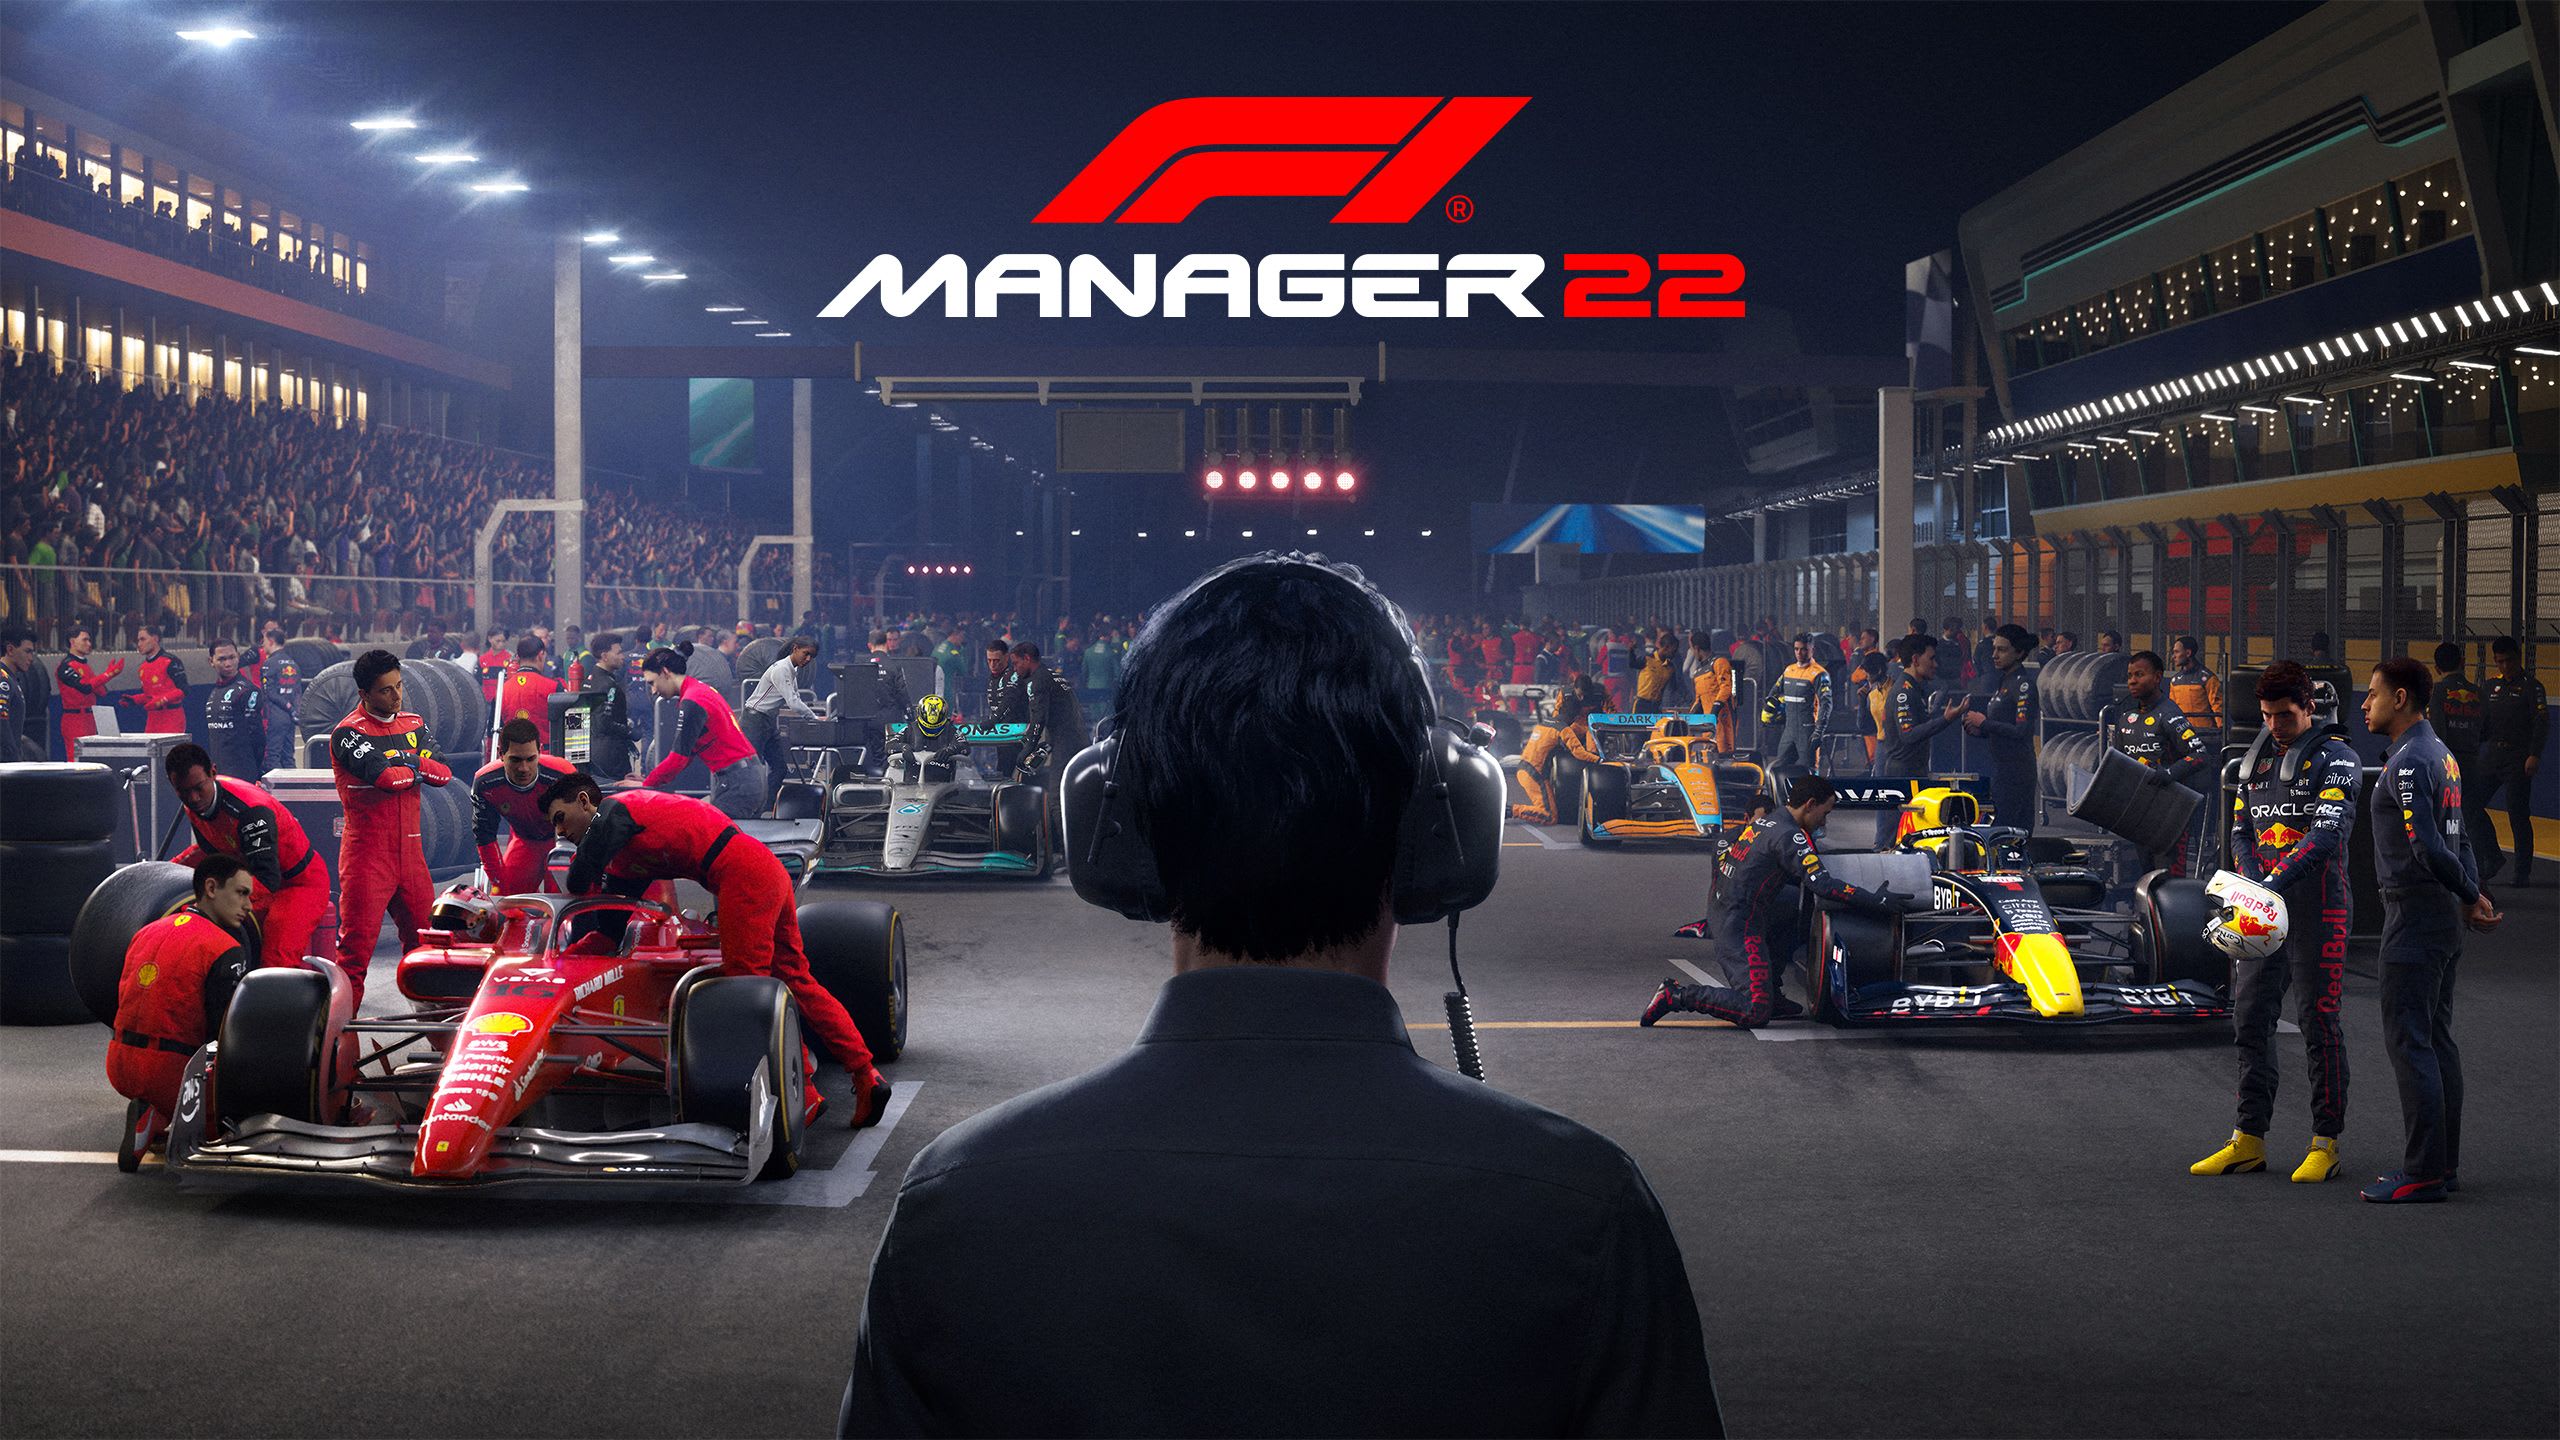 F1 Manager 2022 keyart showing cars being readied on the grid.